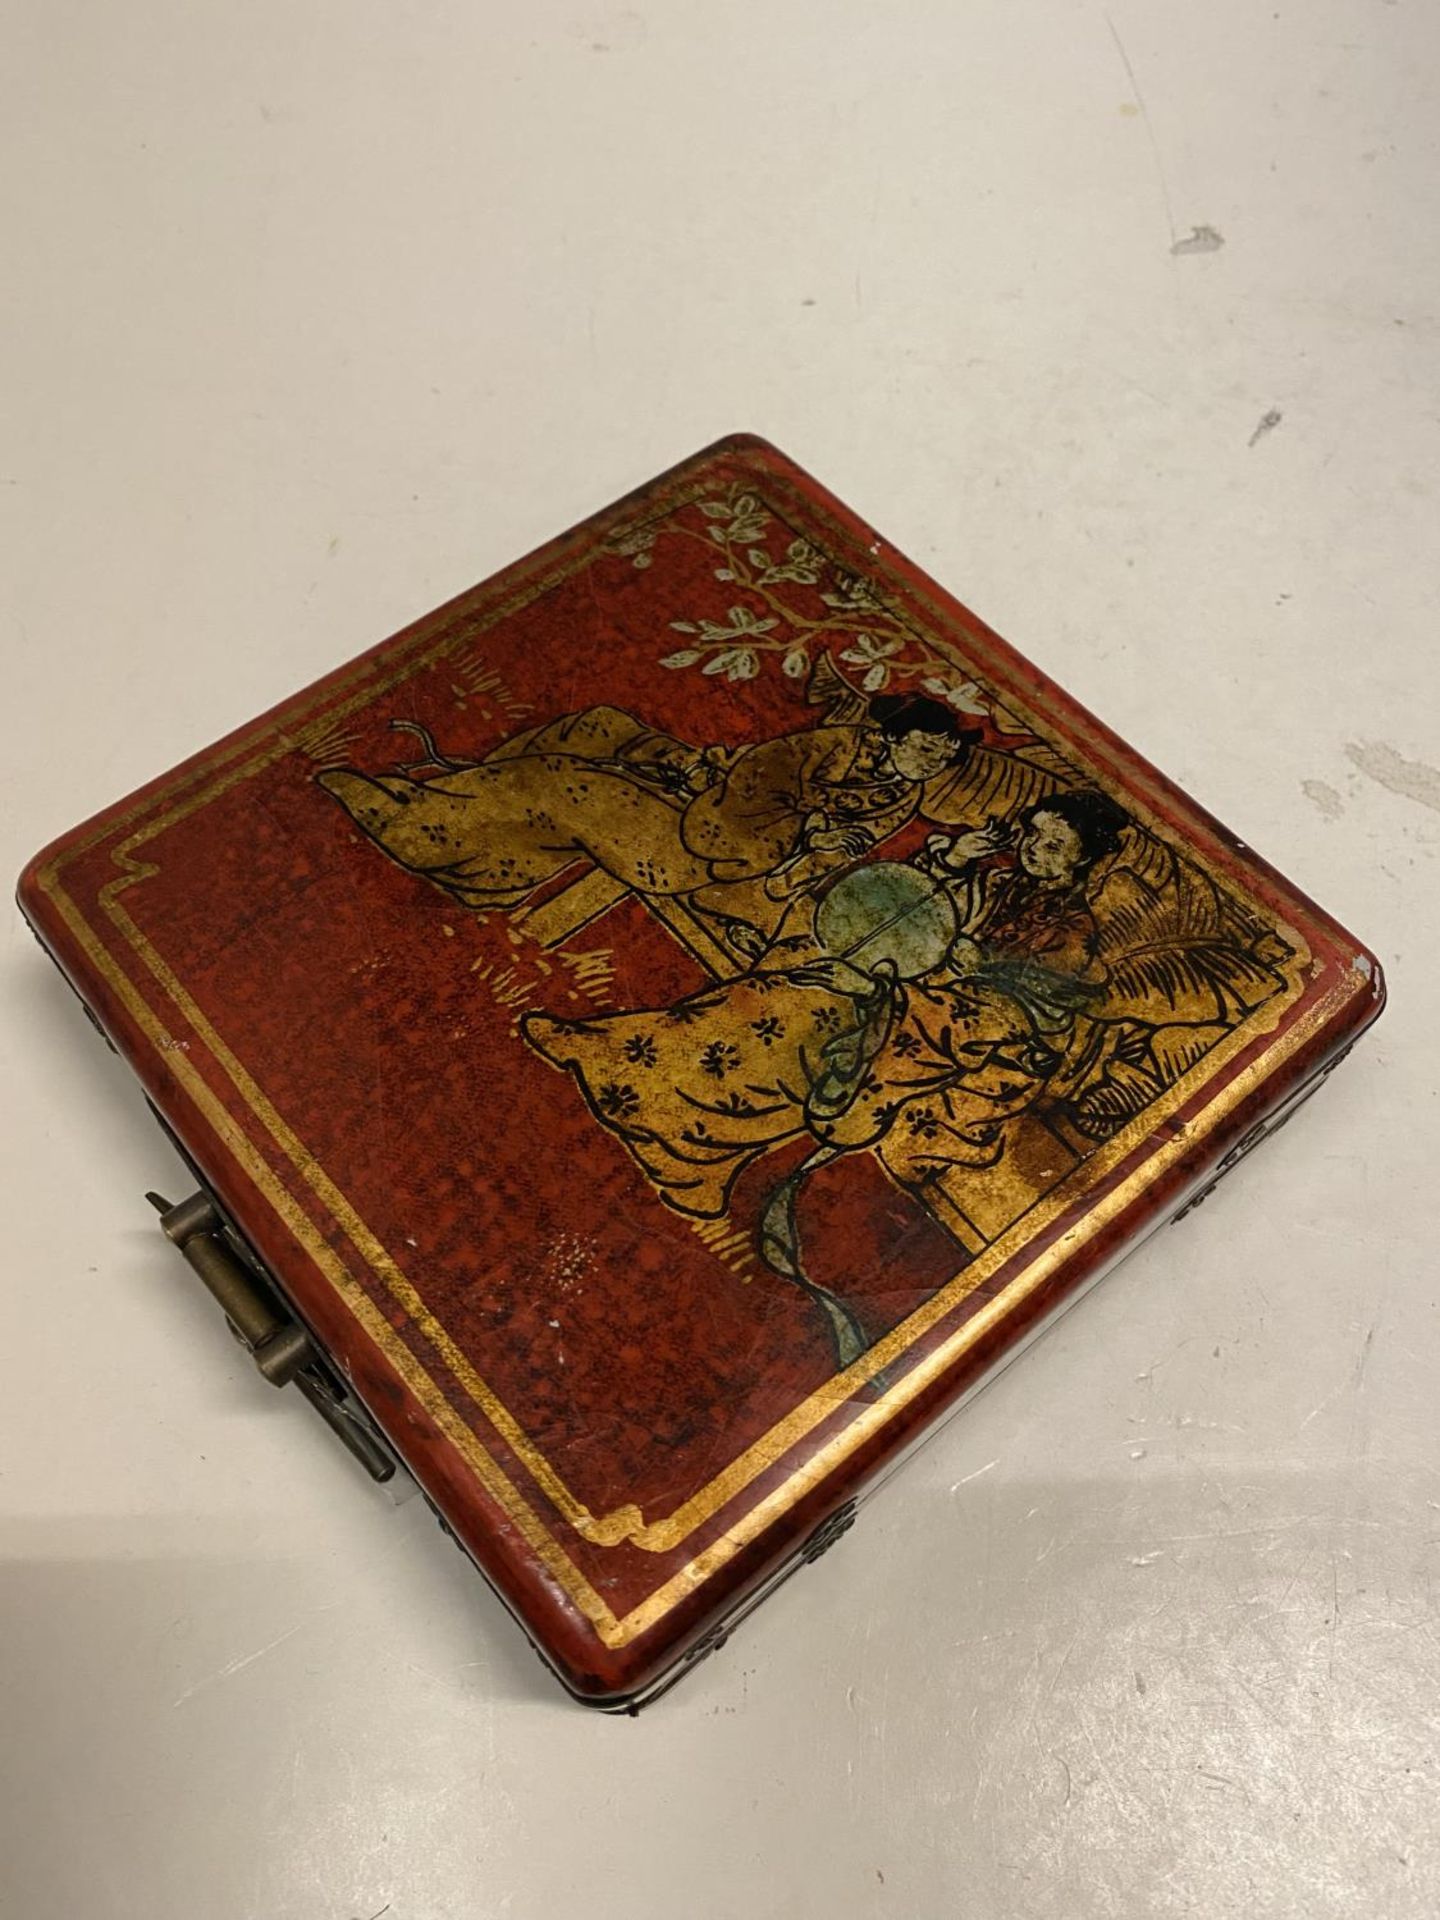 AN ORIENTAL DECORATED TRINKET BOX WITH A PICTURE OF GEISHA GIRLS AGAINST A RED BACKGROUND SIZE - Image 2 of 5